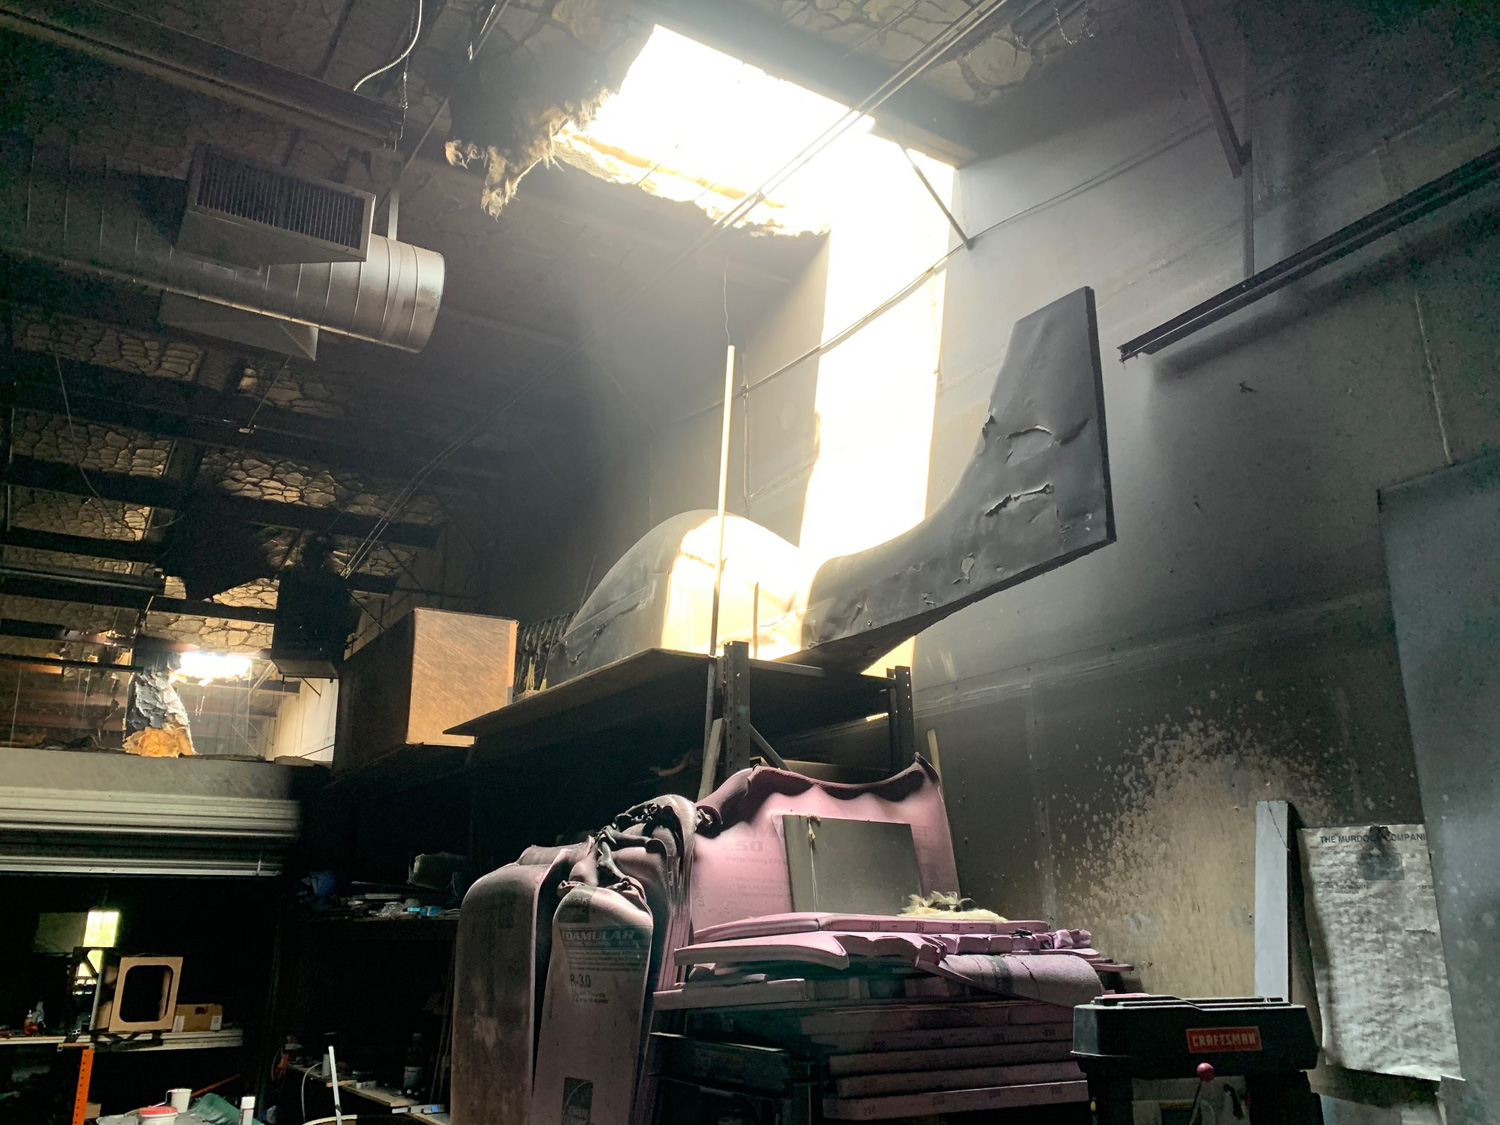 Fire damage at the Belite facility. Photo: James Wiebe/Belite.